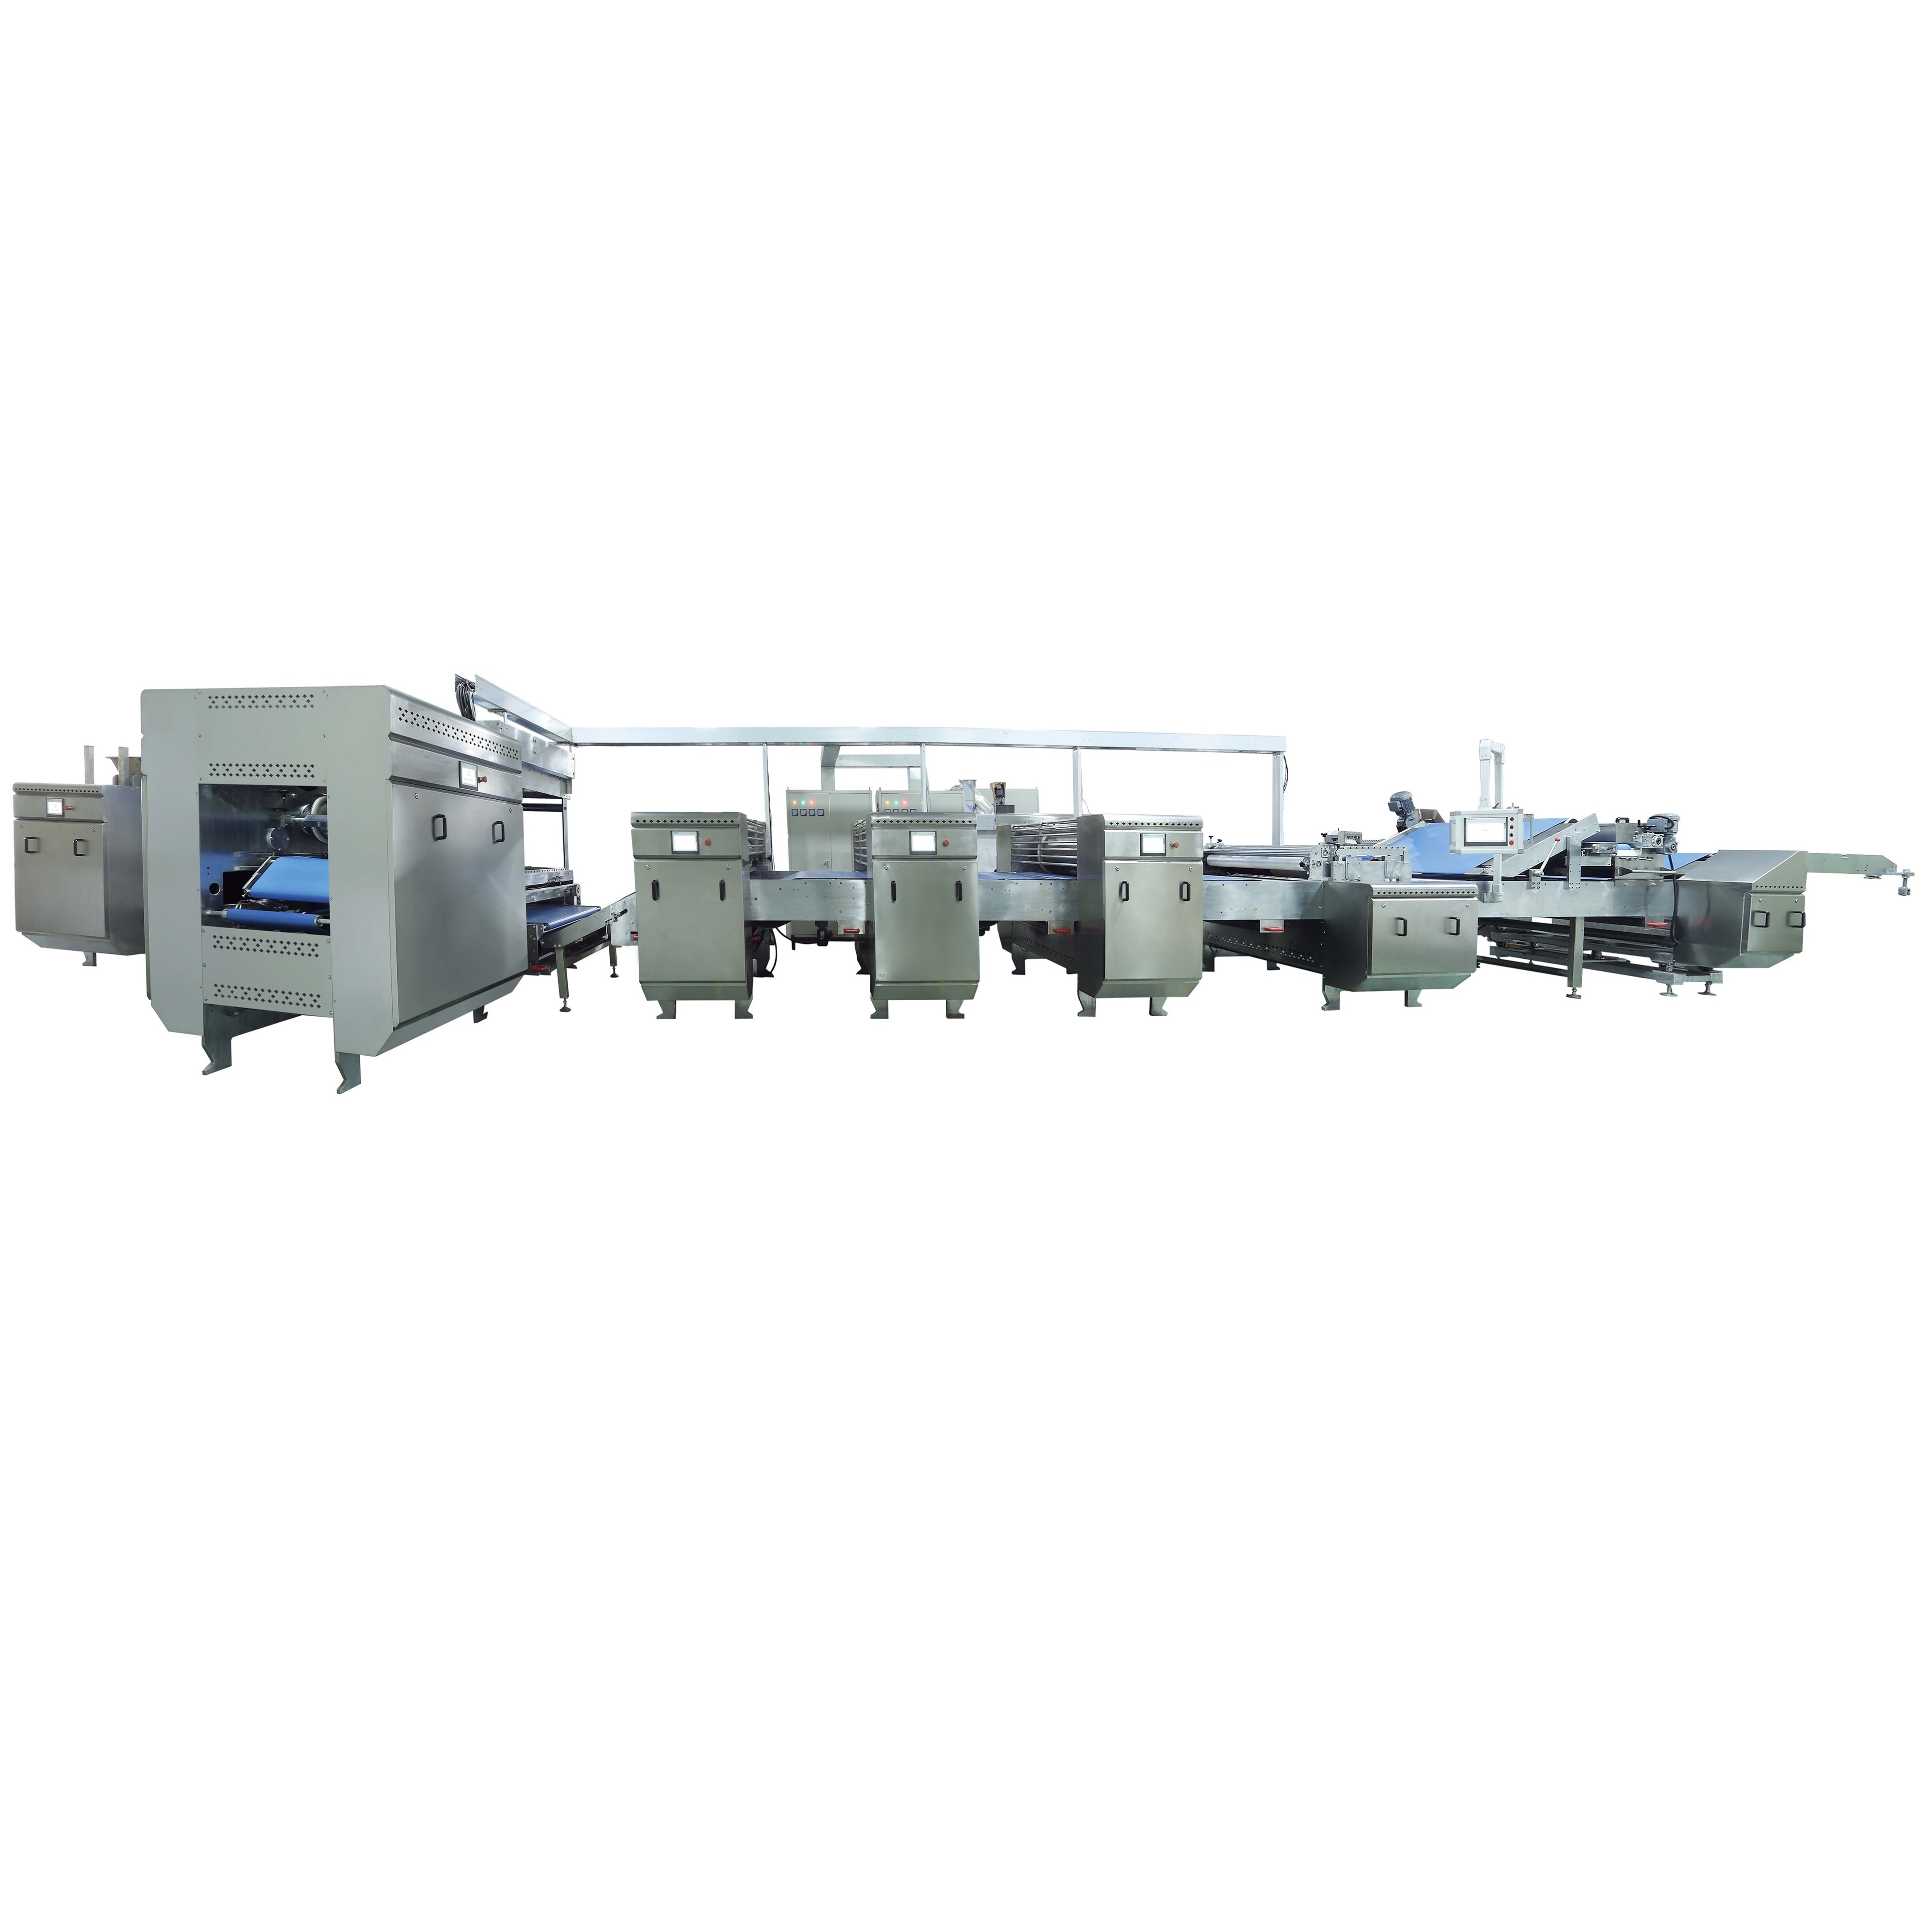 Industrial Biscuit Making Machine for Sale – Biscuit Making Plant.jpg